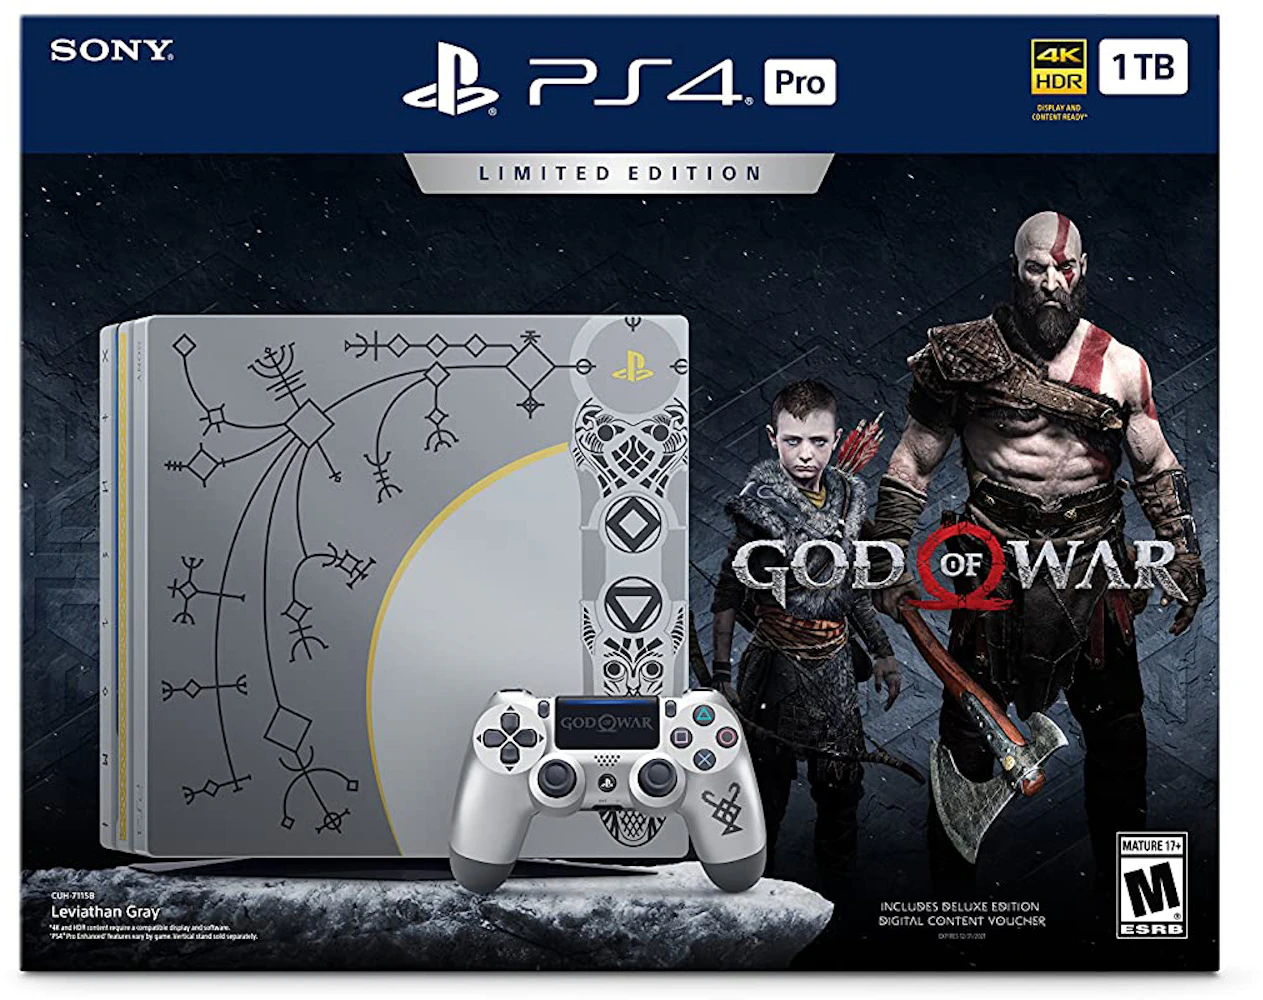 Sony PlayStation 4 Pro 1TB Limited Edition of War Console Bundle 3002212 - US